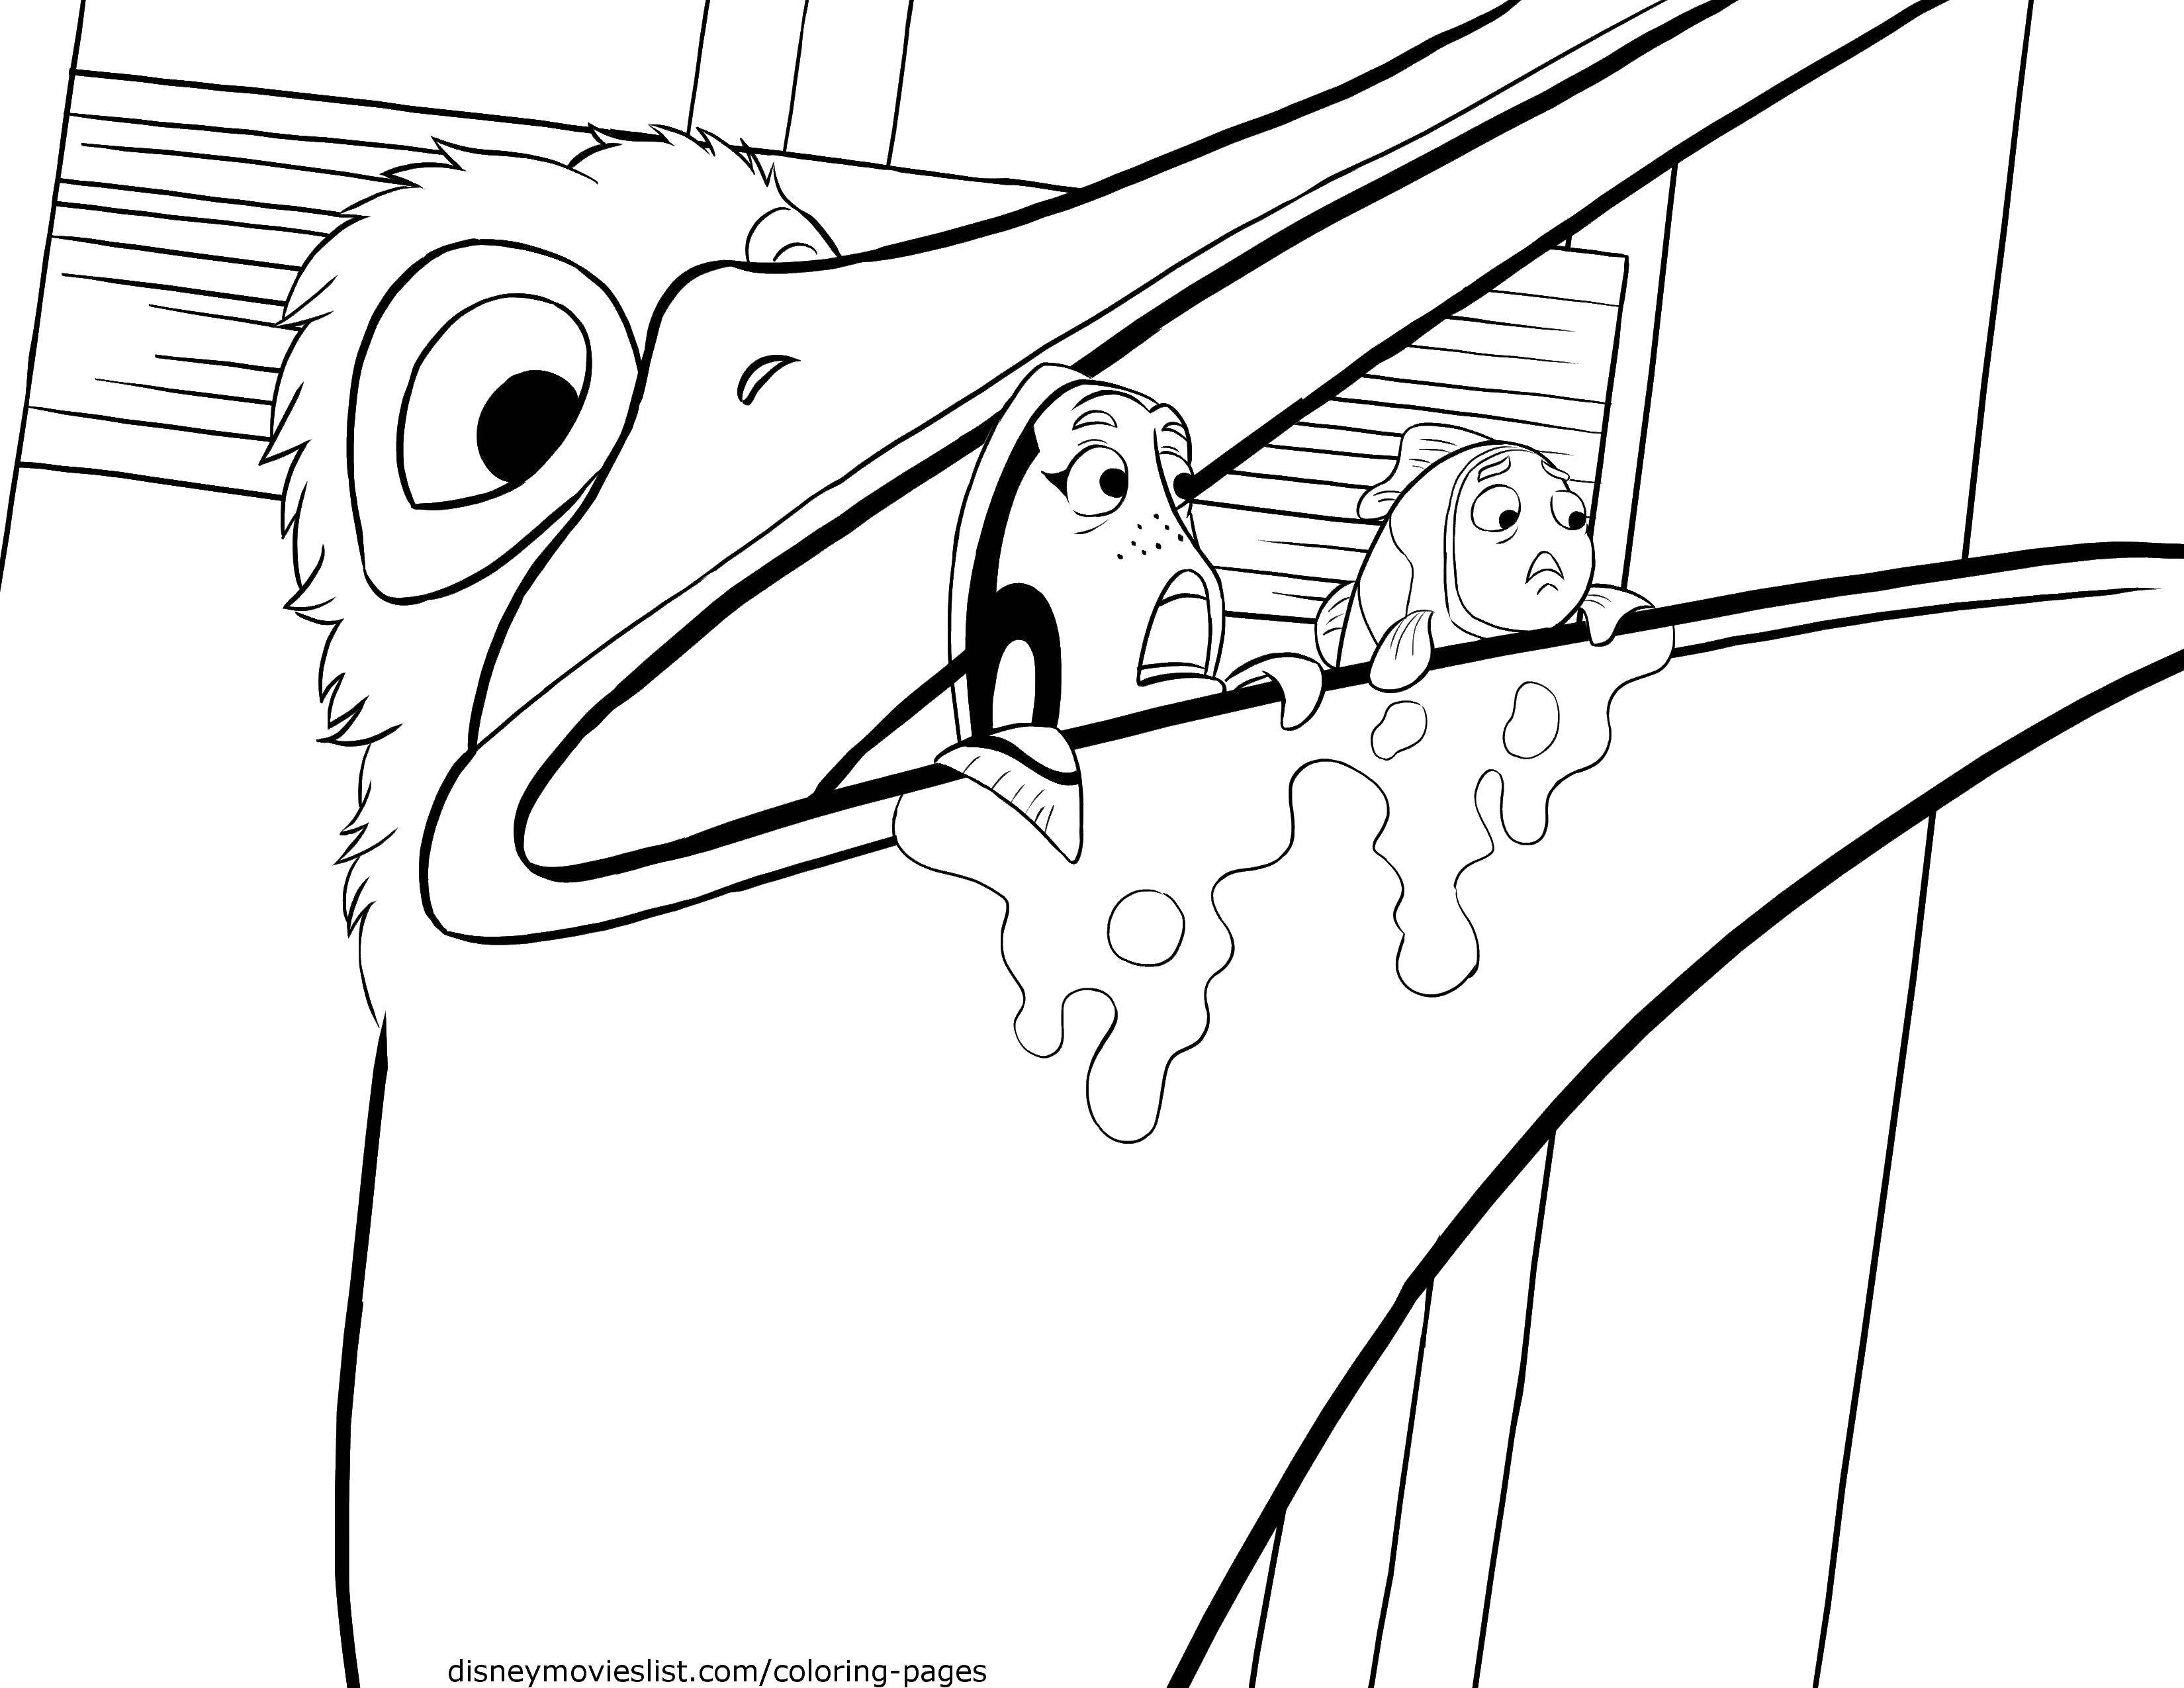 Coloring Fish in the mouth of a Pelican. Category Disney coloring pages. Tags:  Cartoon character.